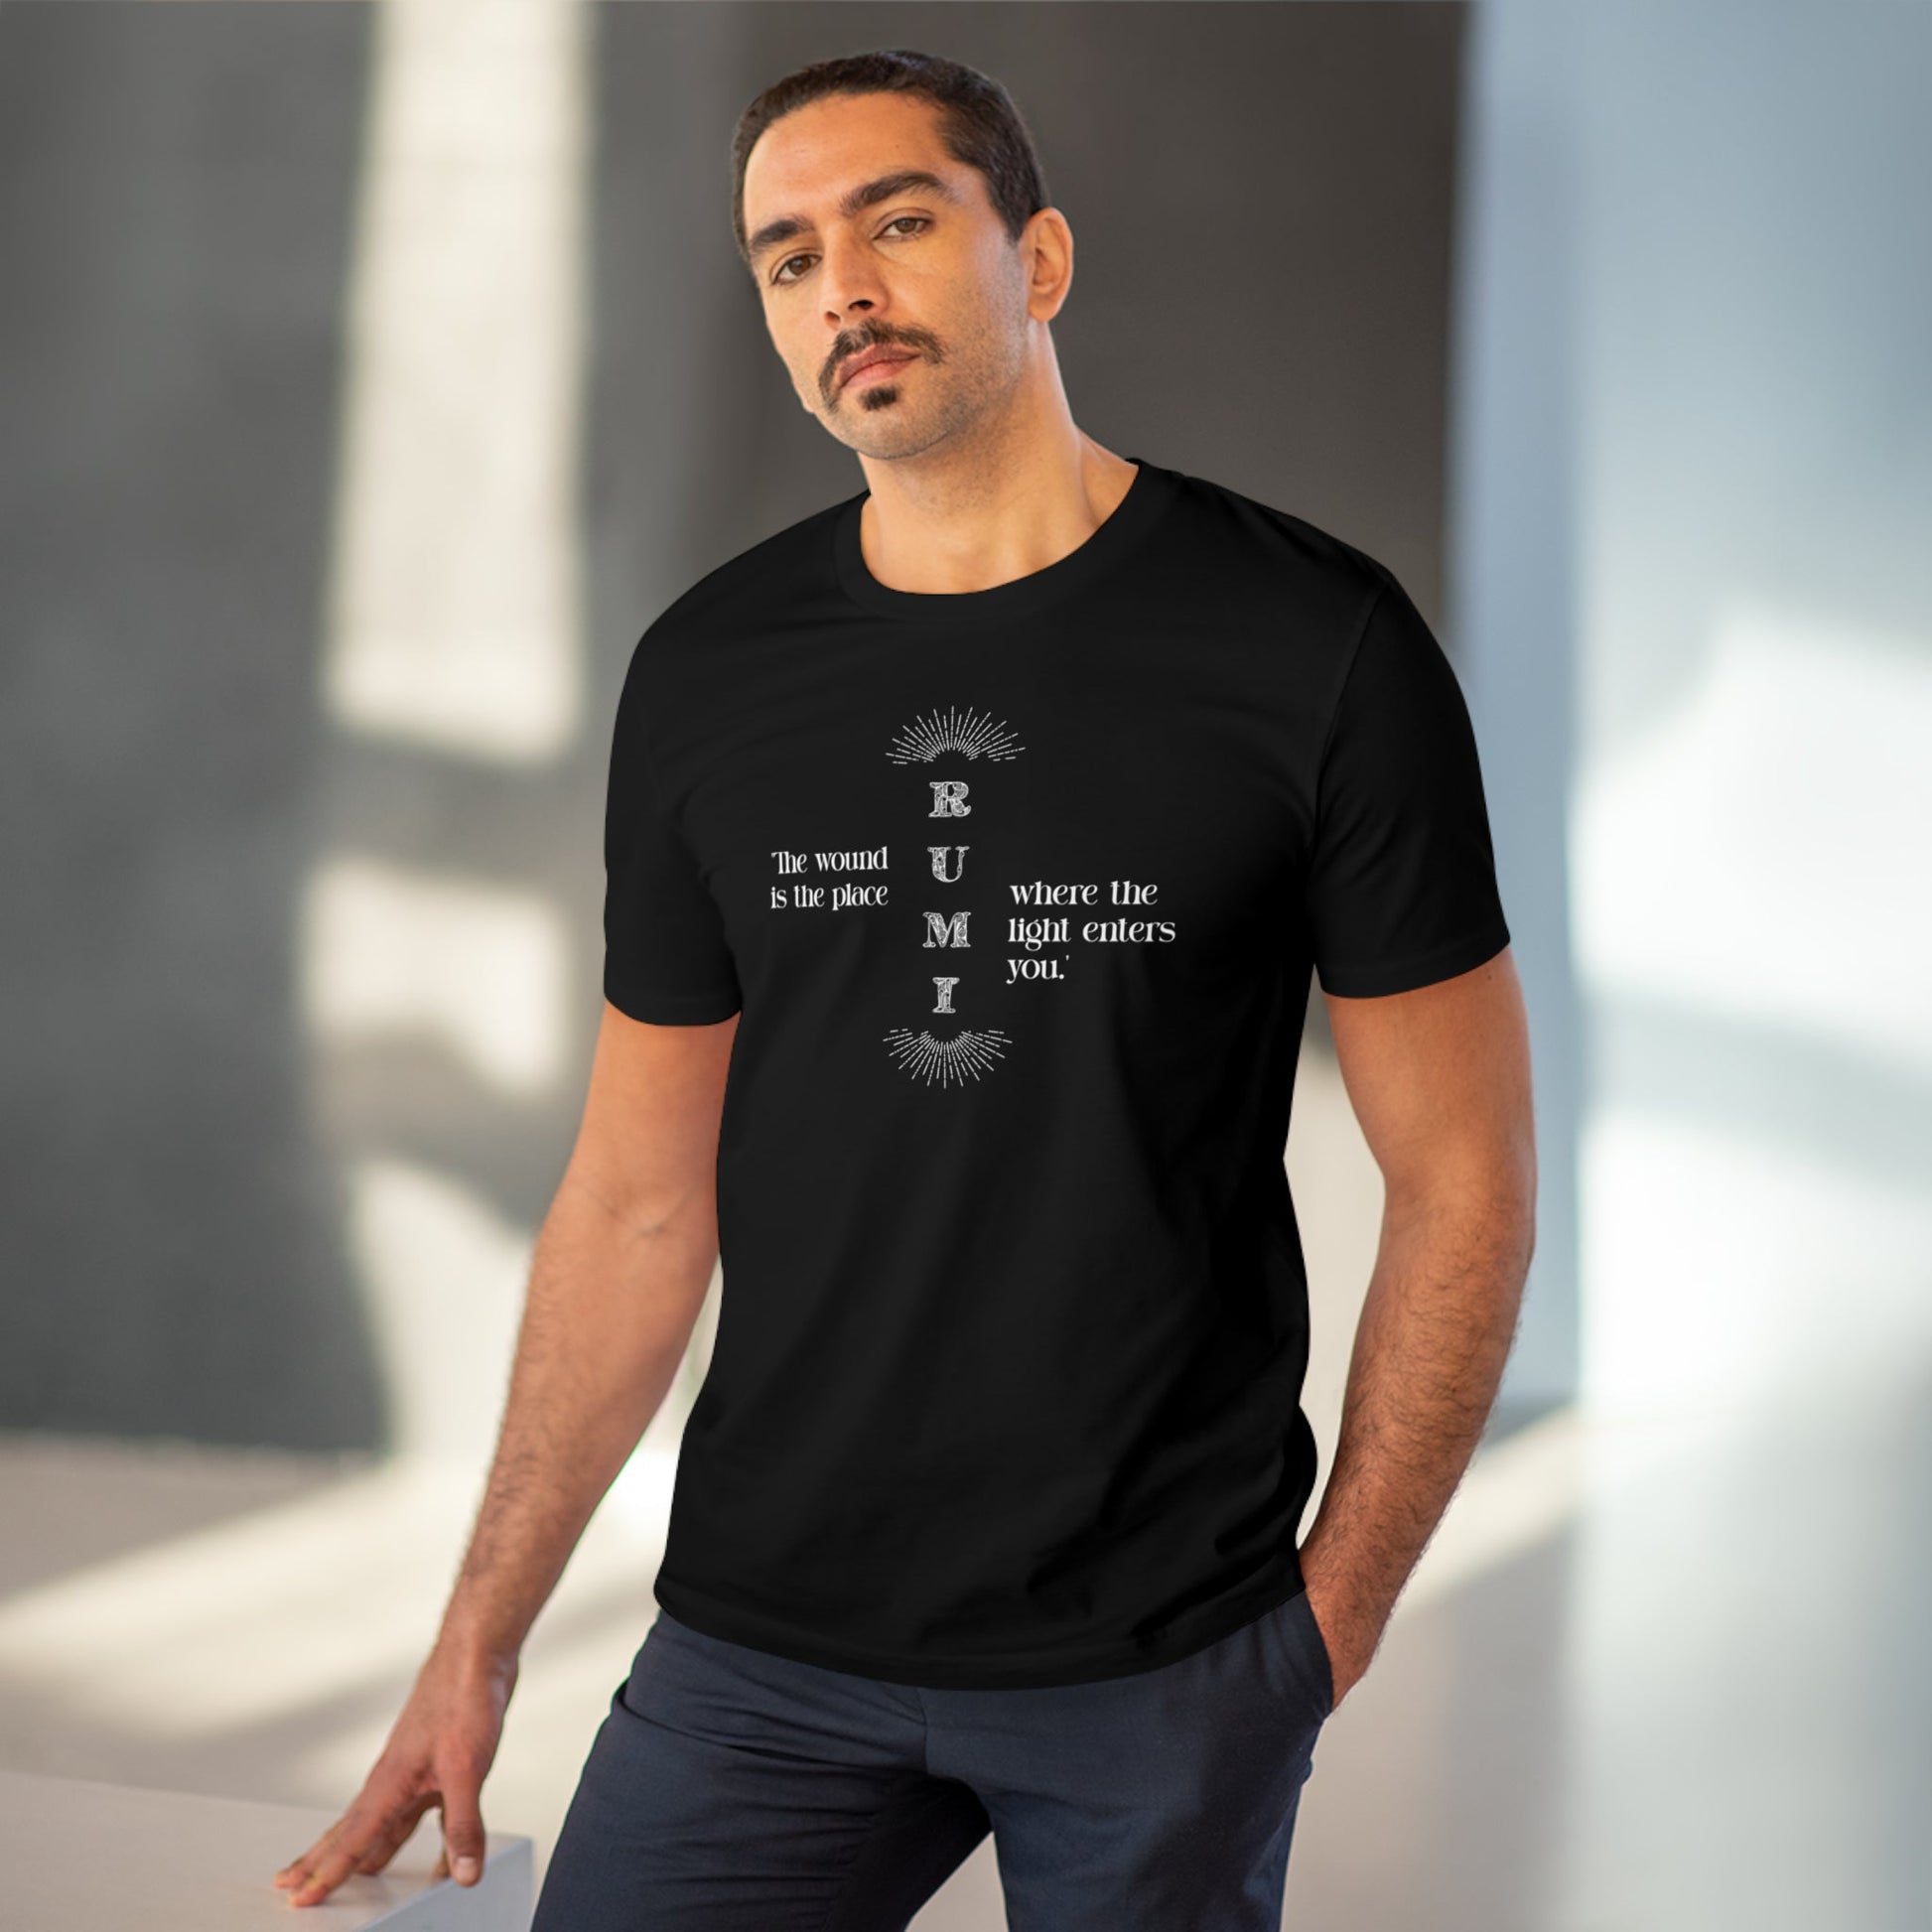 Famous Quotes 'Light Entering' Rumi Organic Cotton T-shirt - Famous Quote Tee